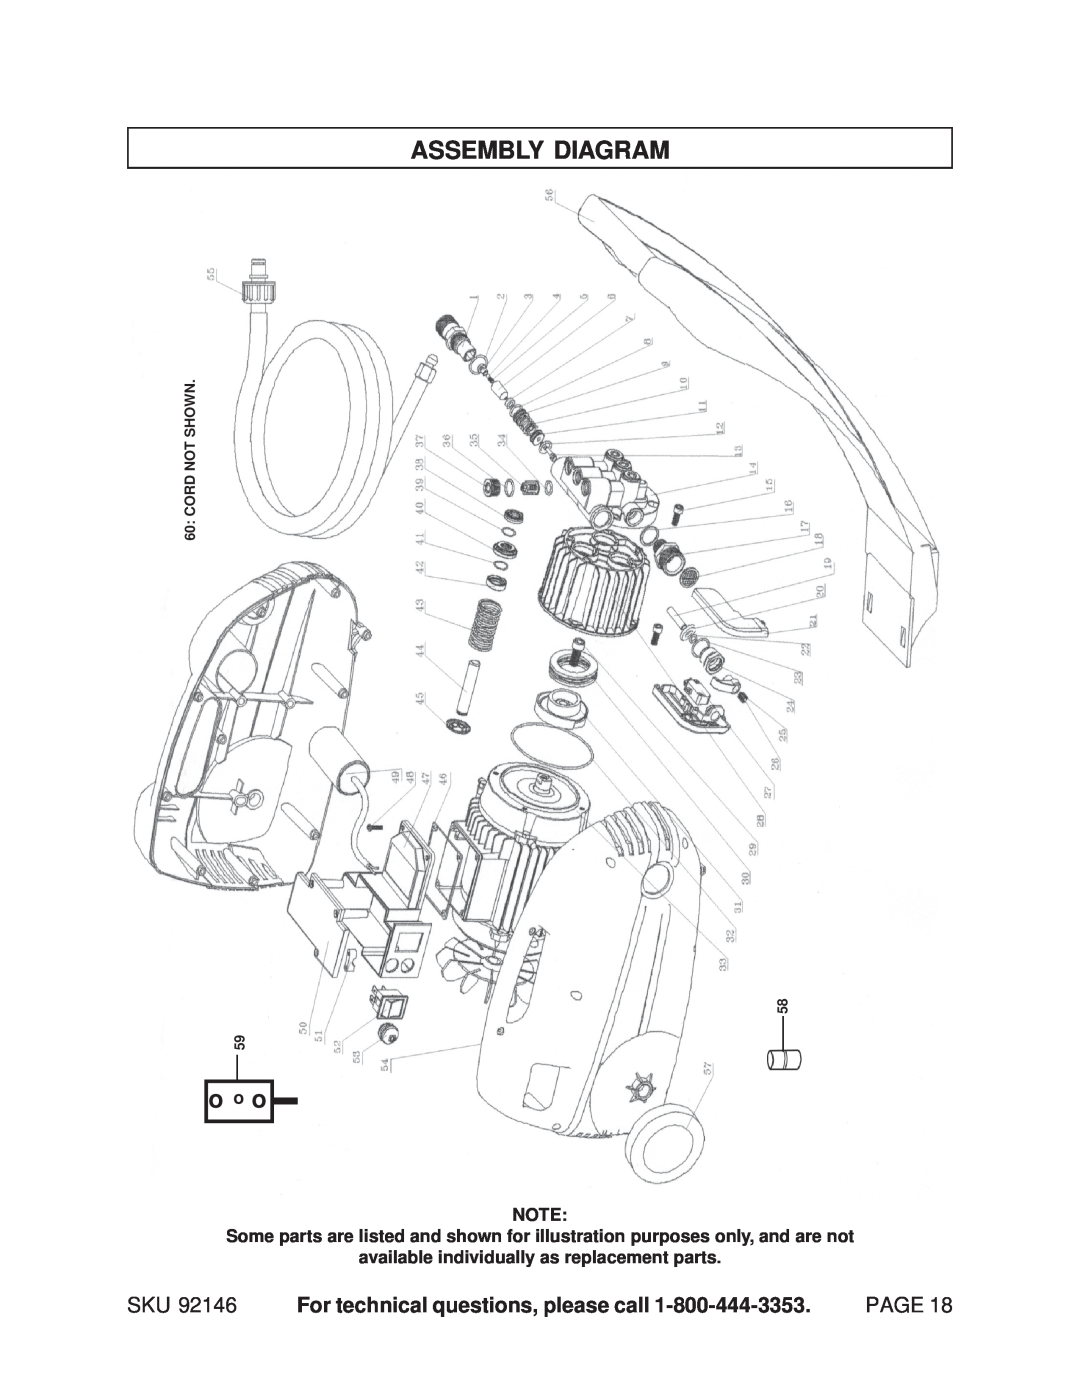 Chicago Electric 92146 manual Assembly Diagram, o o o, For technical questions, please call, Page, Cord Not Shown 